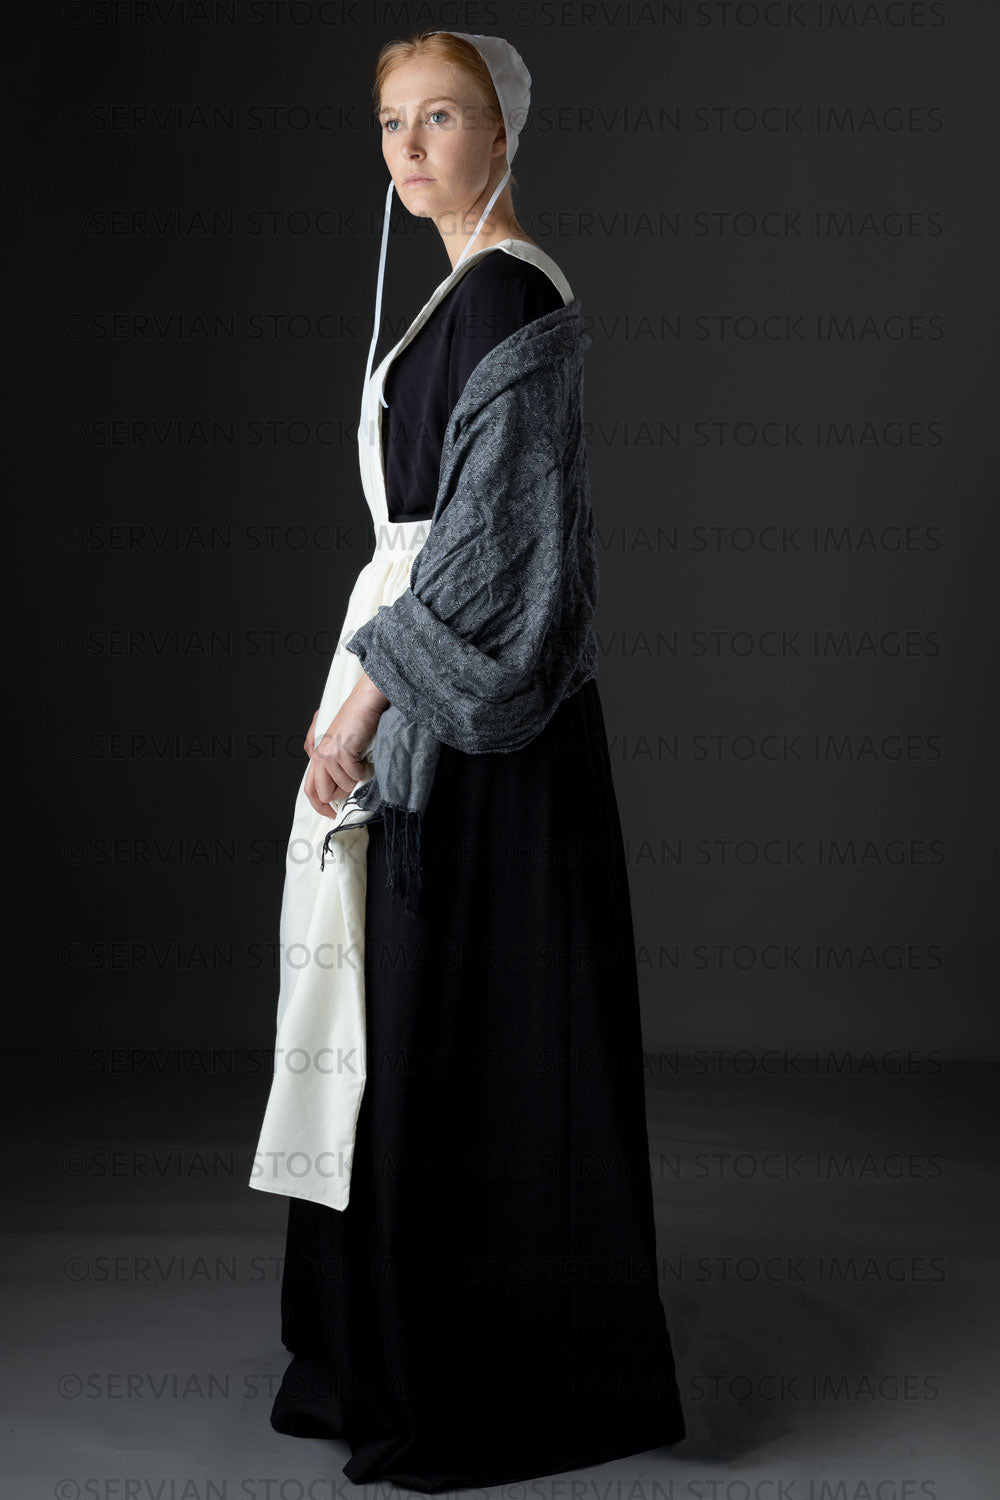 Amish woman wearing a black dress with a white apron and cap (Lauren 0821)